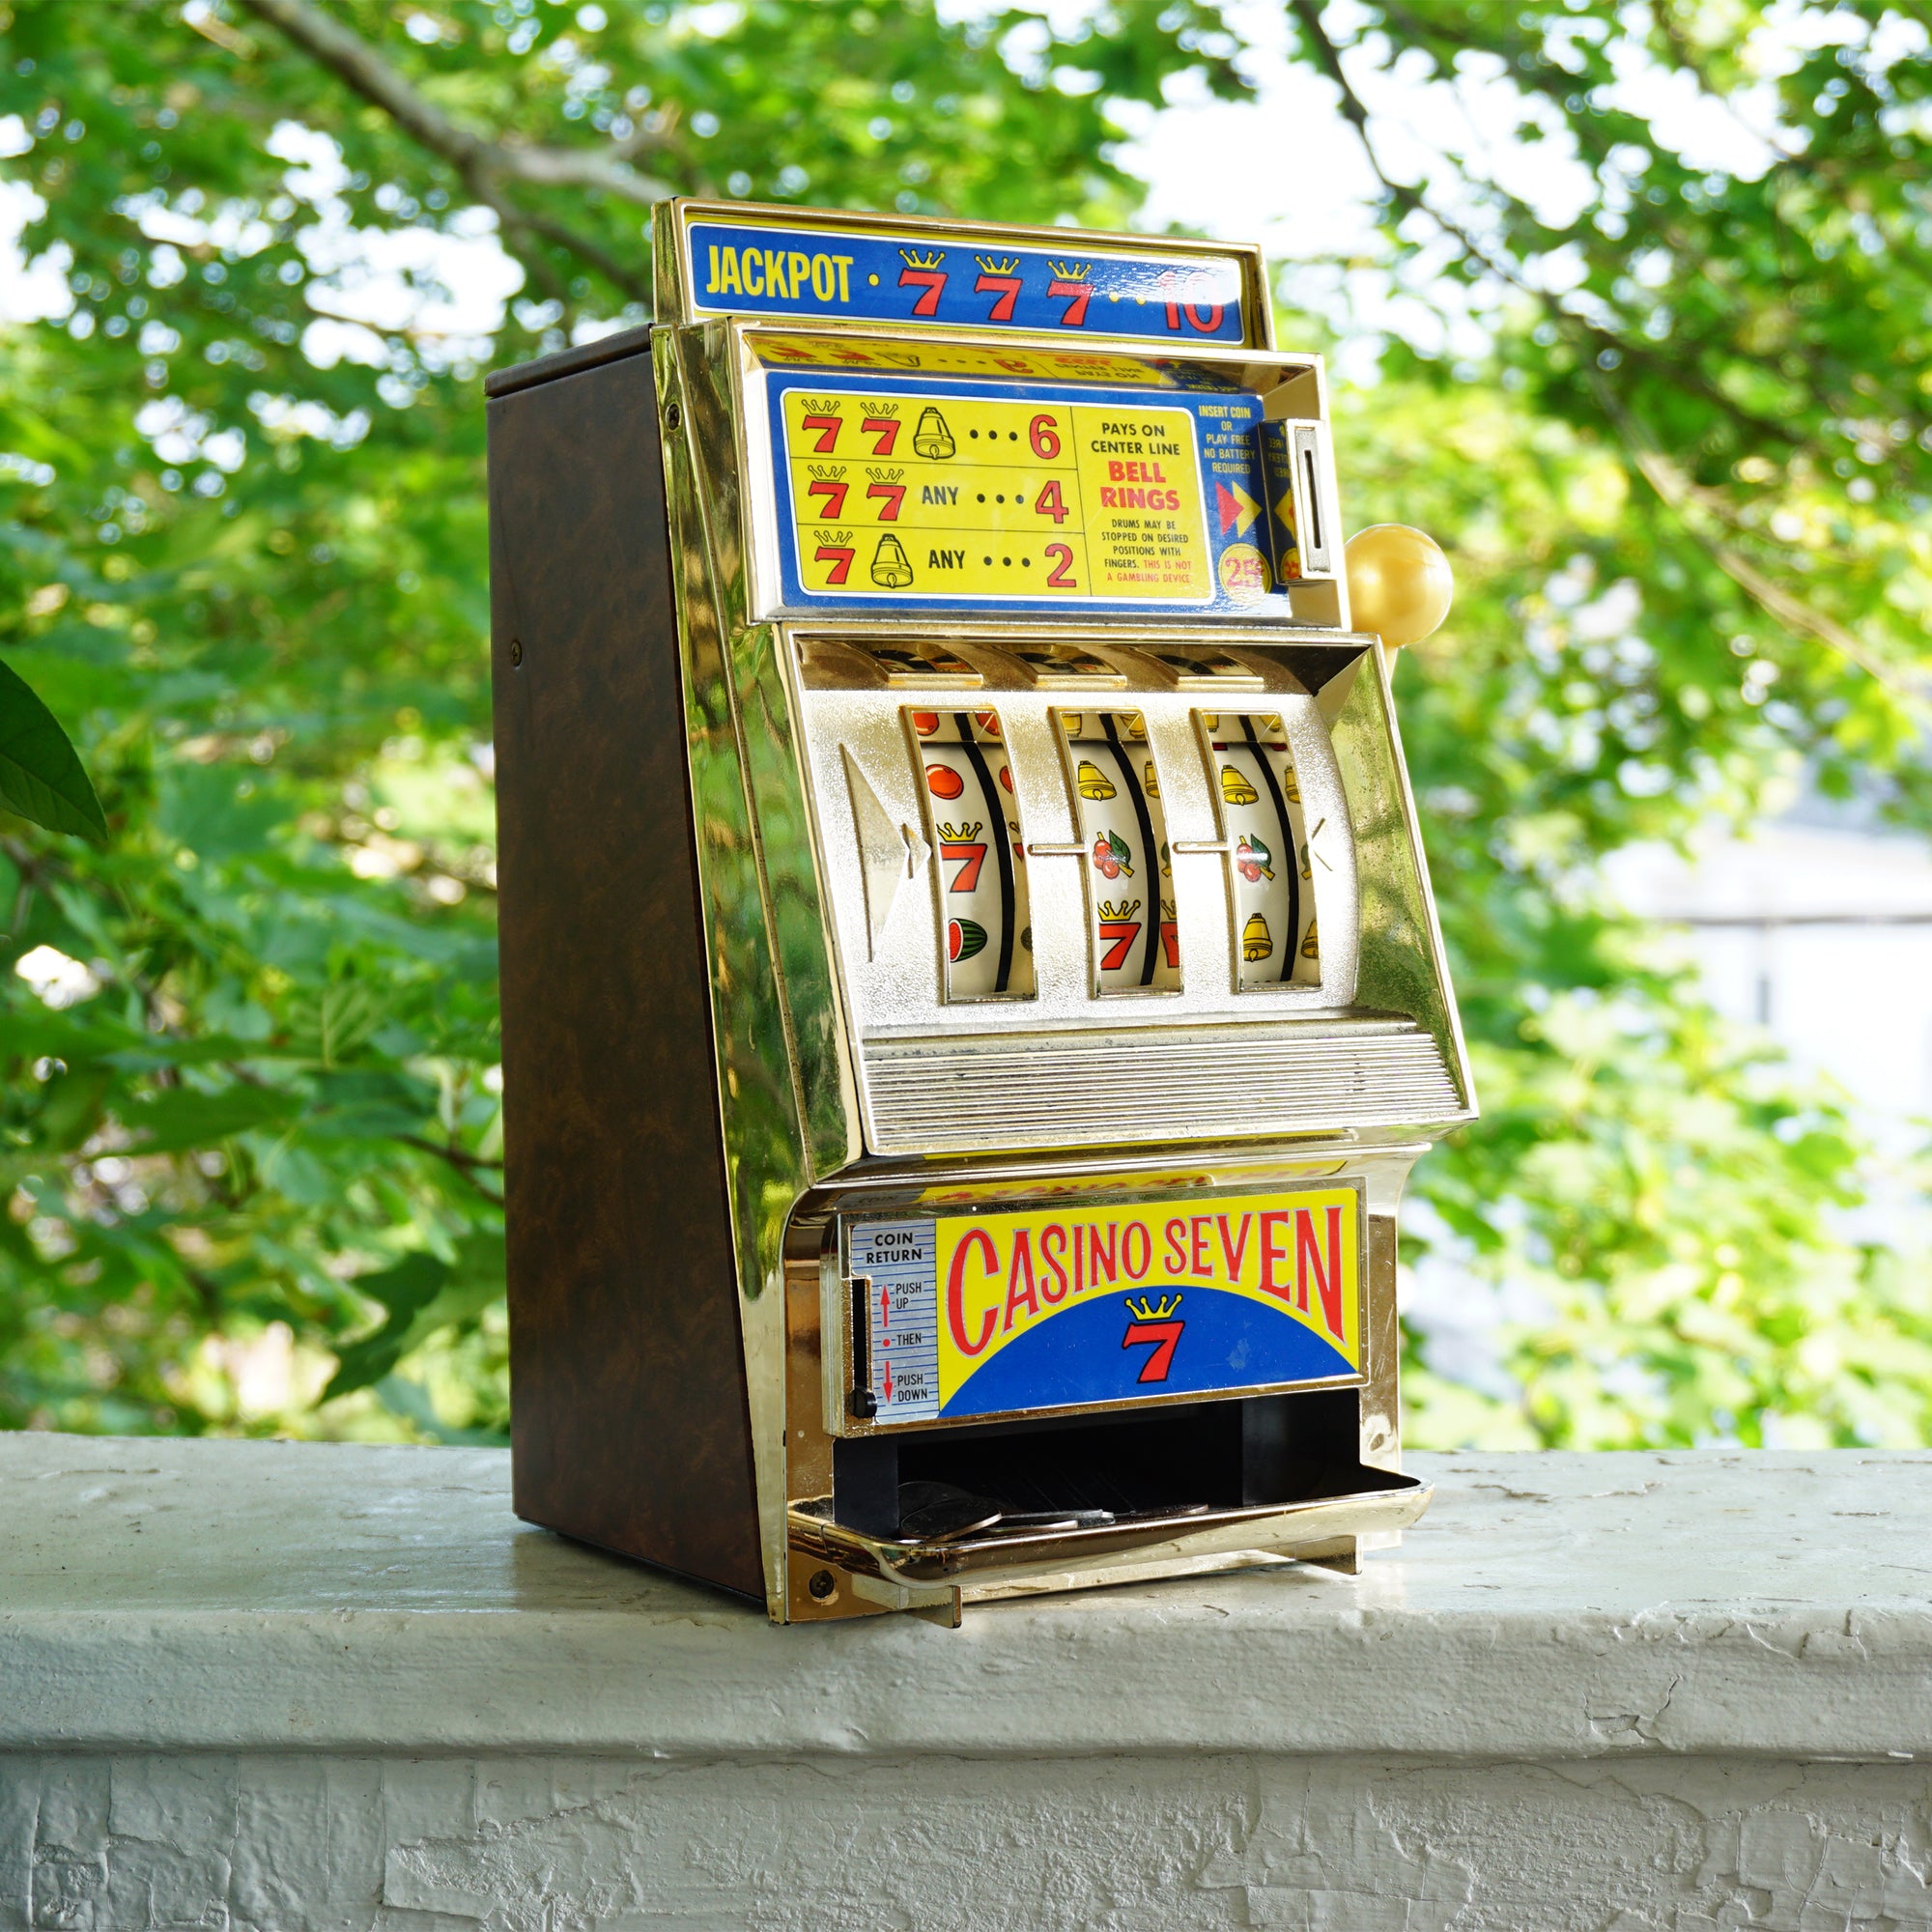 Vintage WACO Jackpot Casino Seven Real Action Slot Machine. Coin or Play Free. Made in Japan.